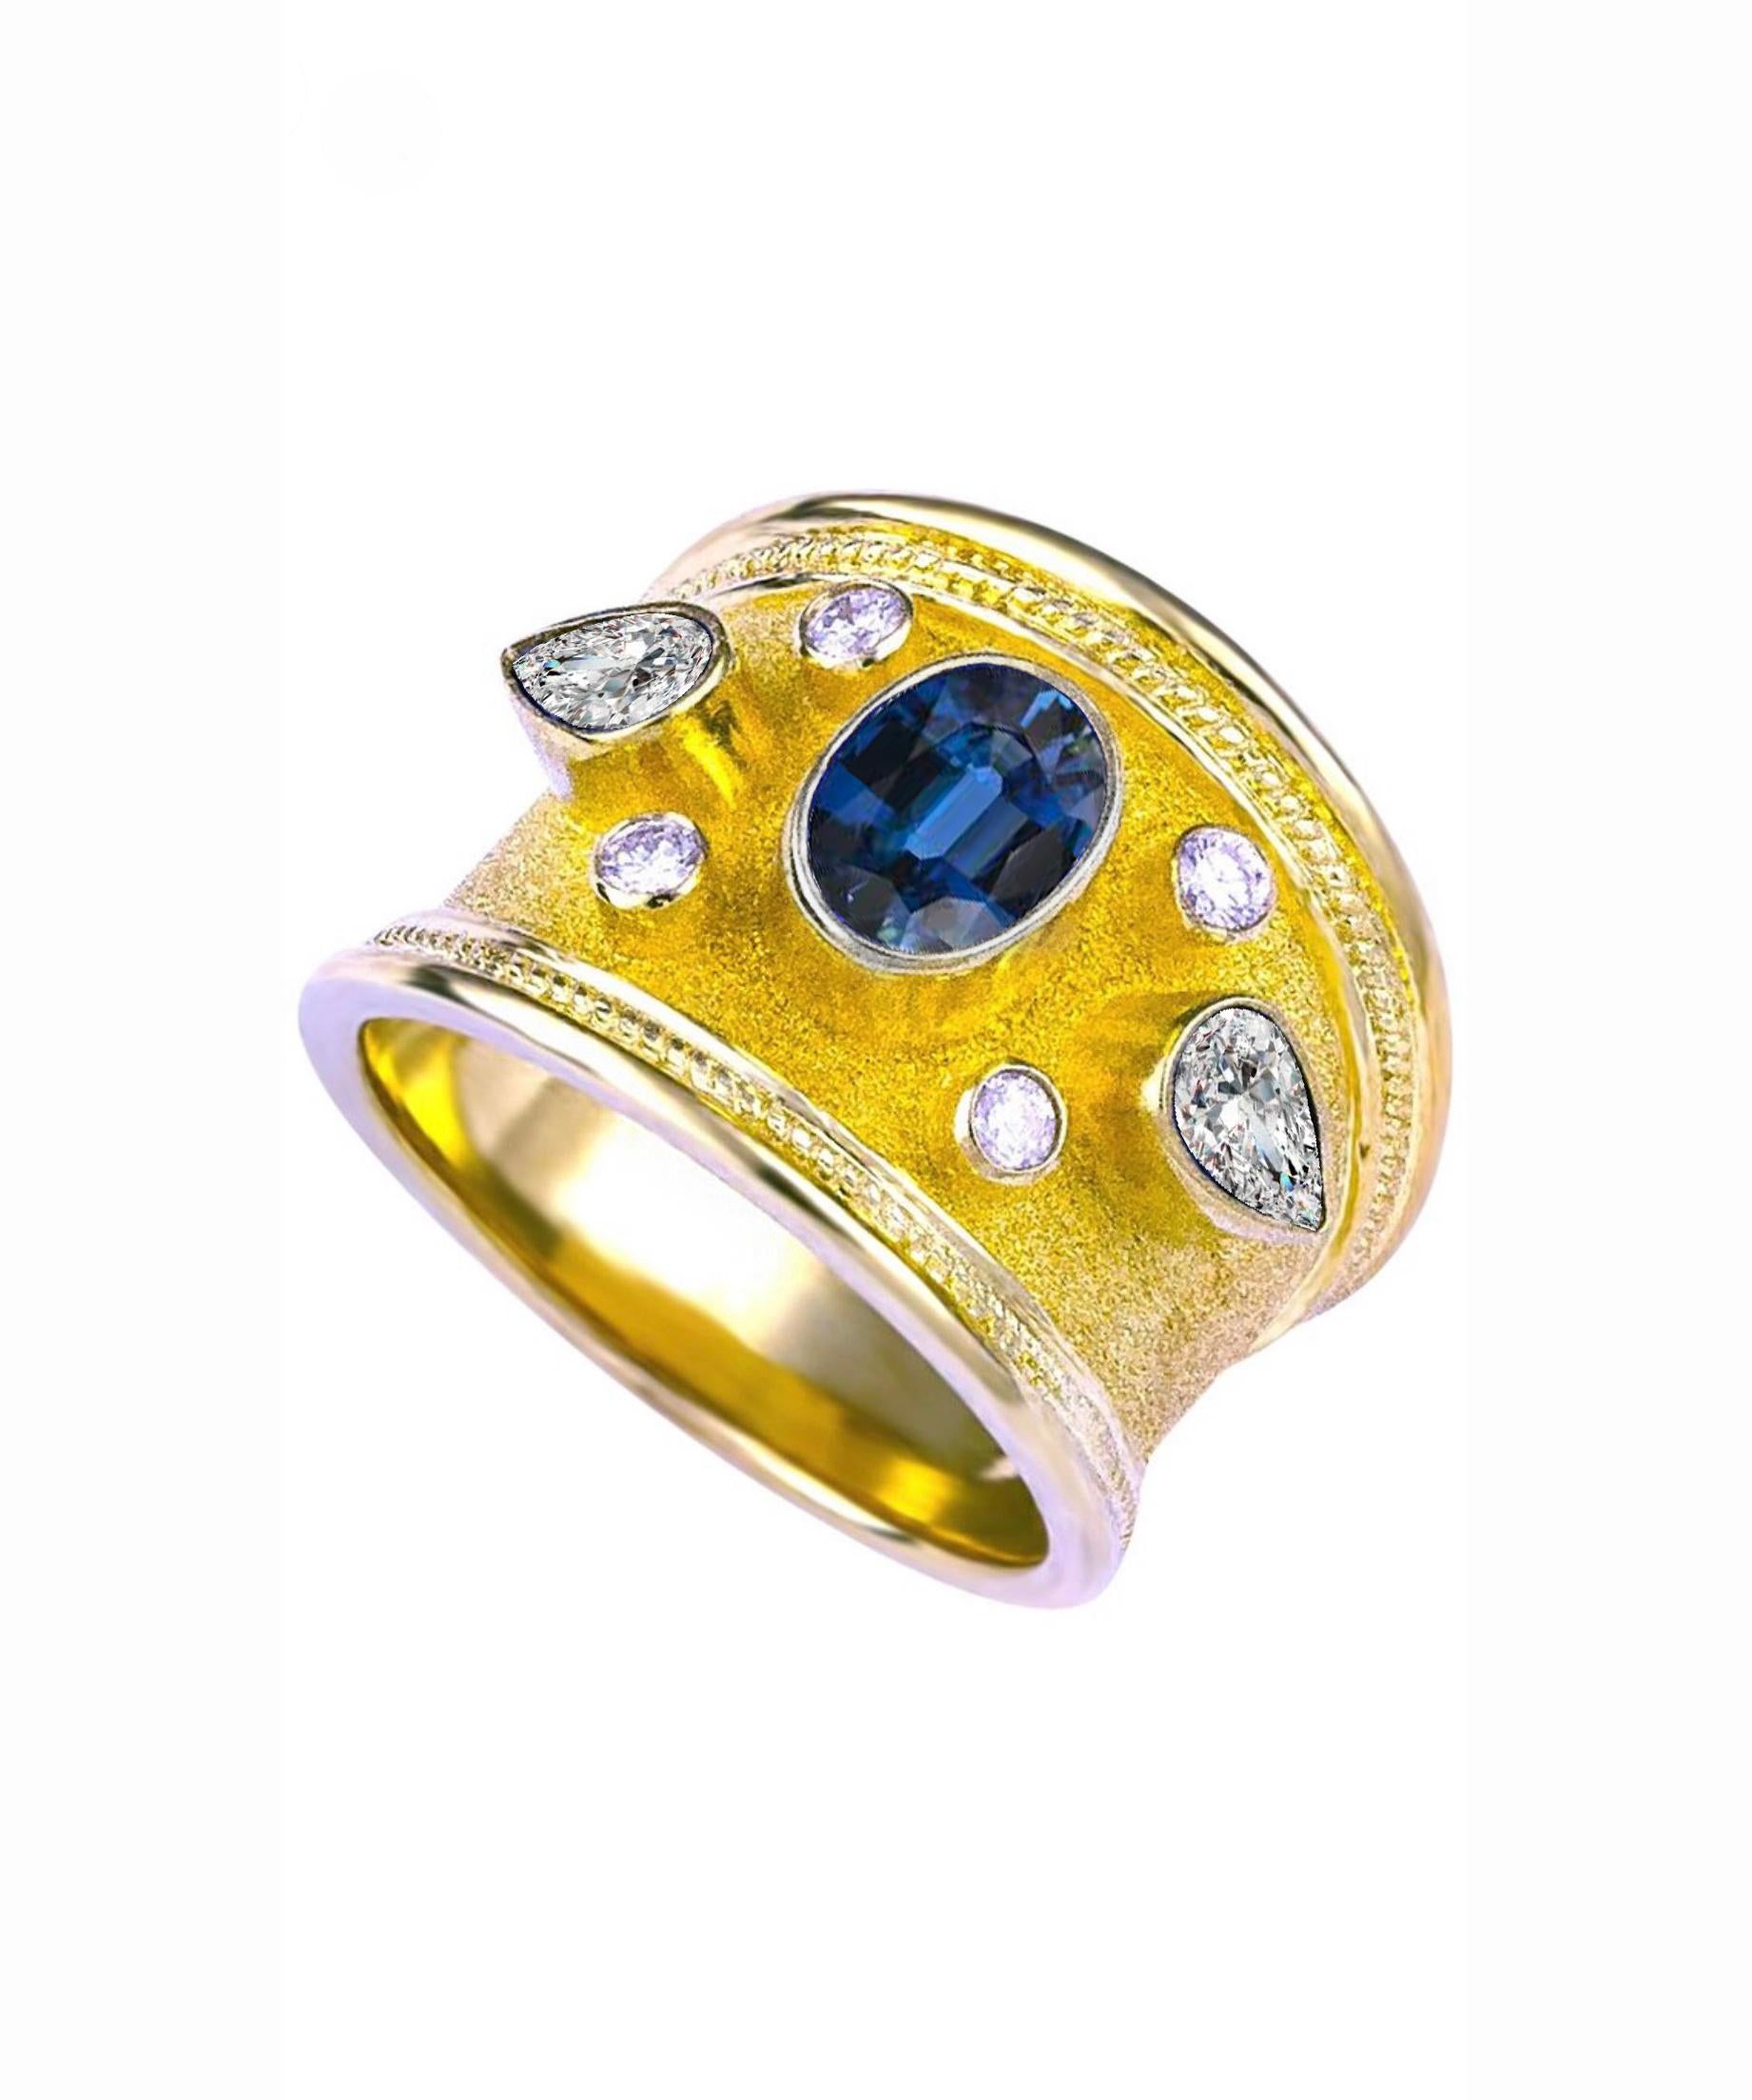 S.Georgios Hand Made 18 Karat Yellow Gold Ring decorated with Byzantine-style granulation and the unique velvet finish on the background. The stunning ring features in the center an Oval Blue Sapphire the weight of 1,46 Carat, 4 Brilliant cut White